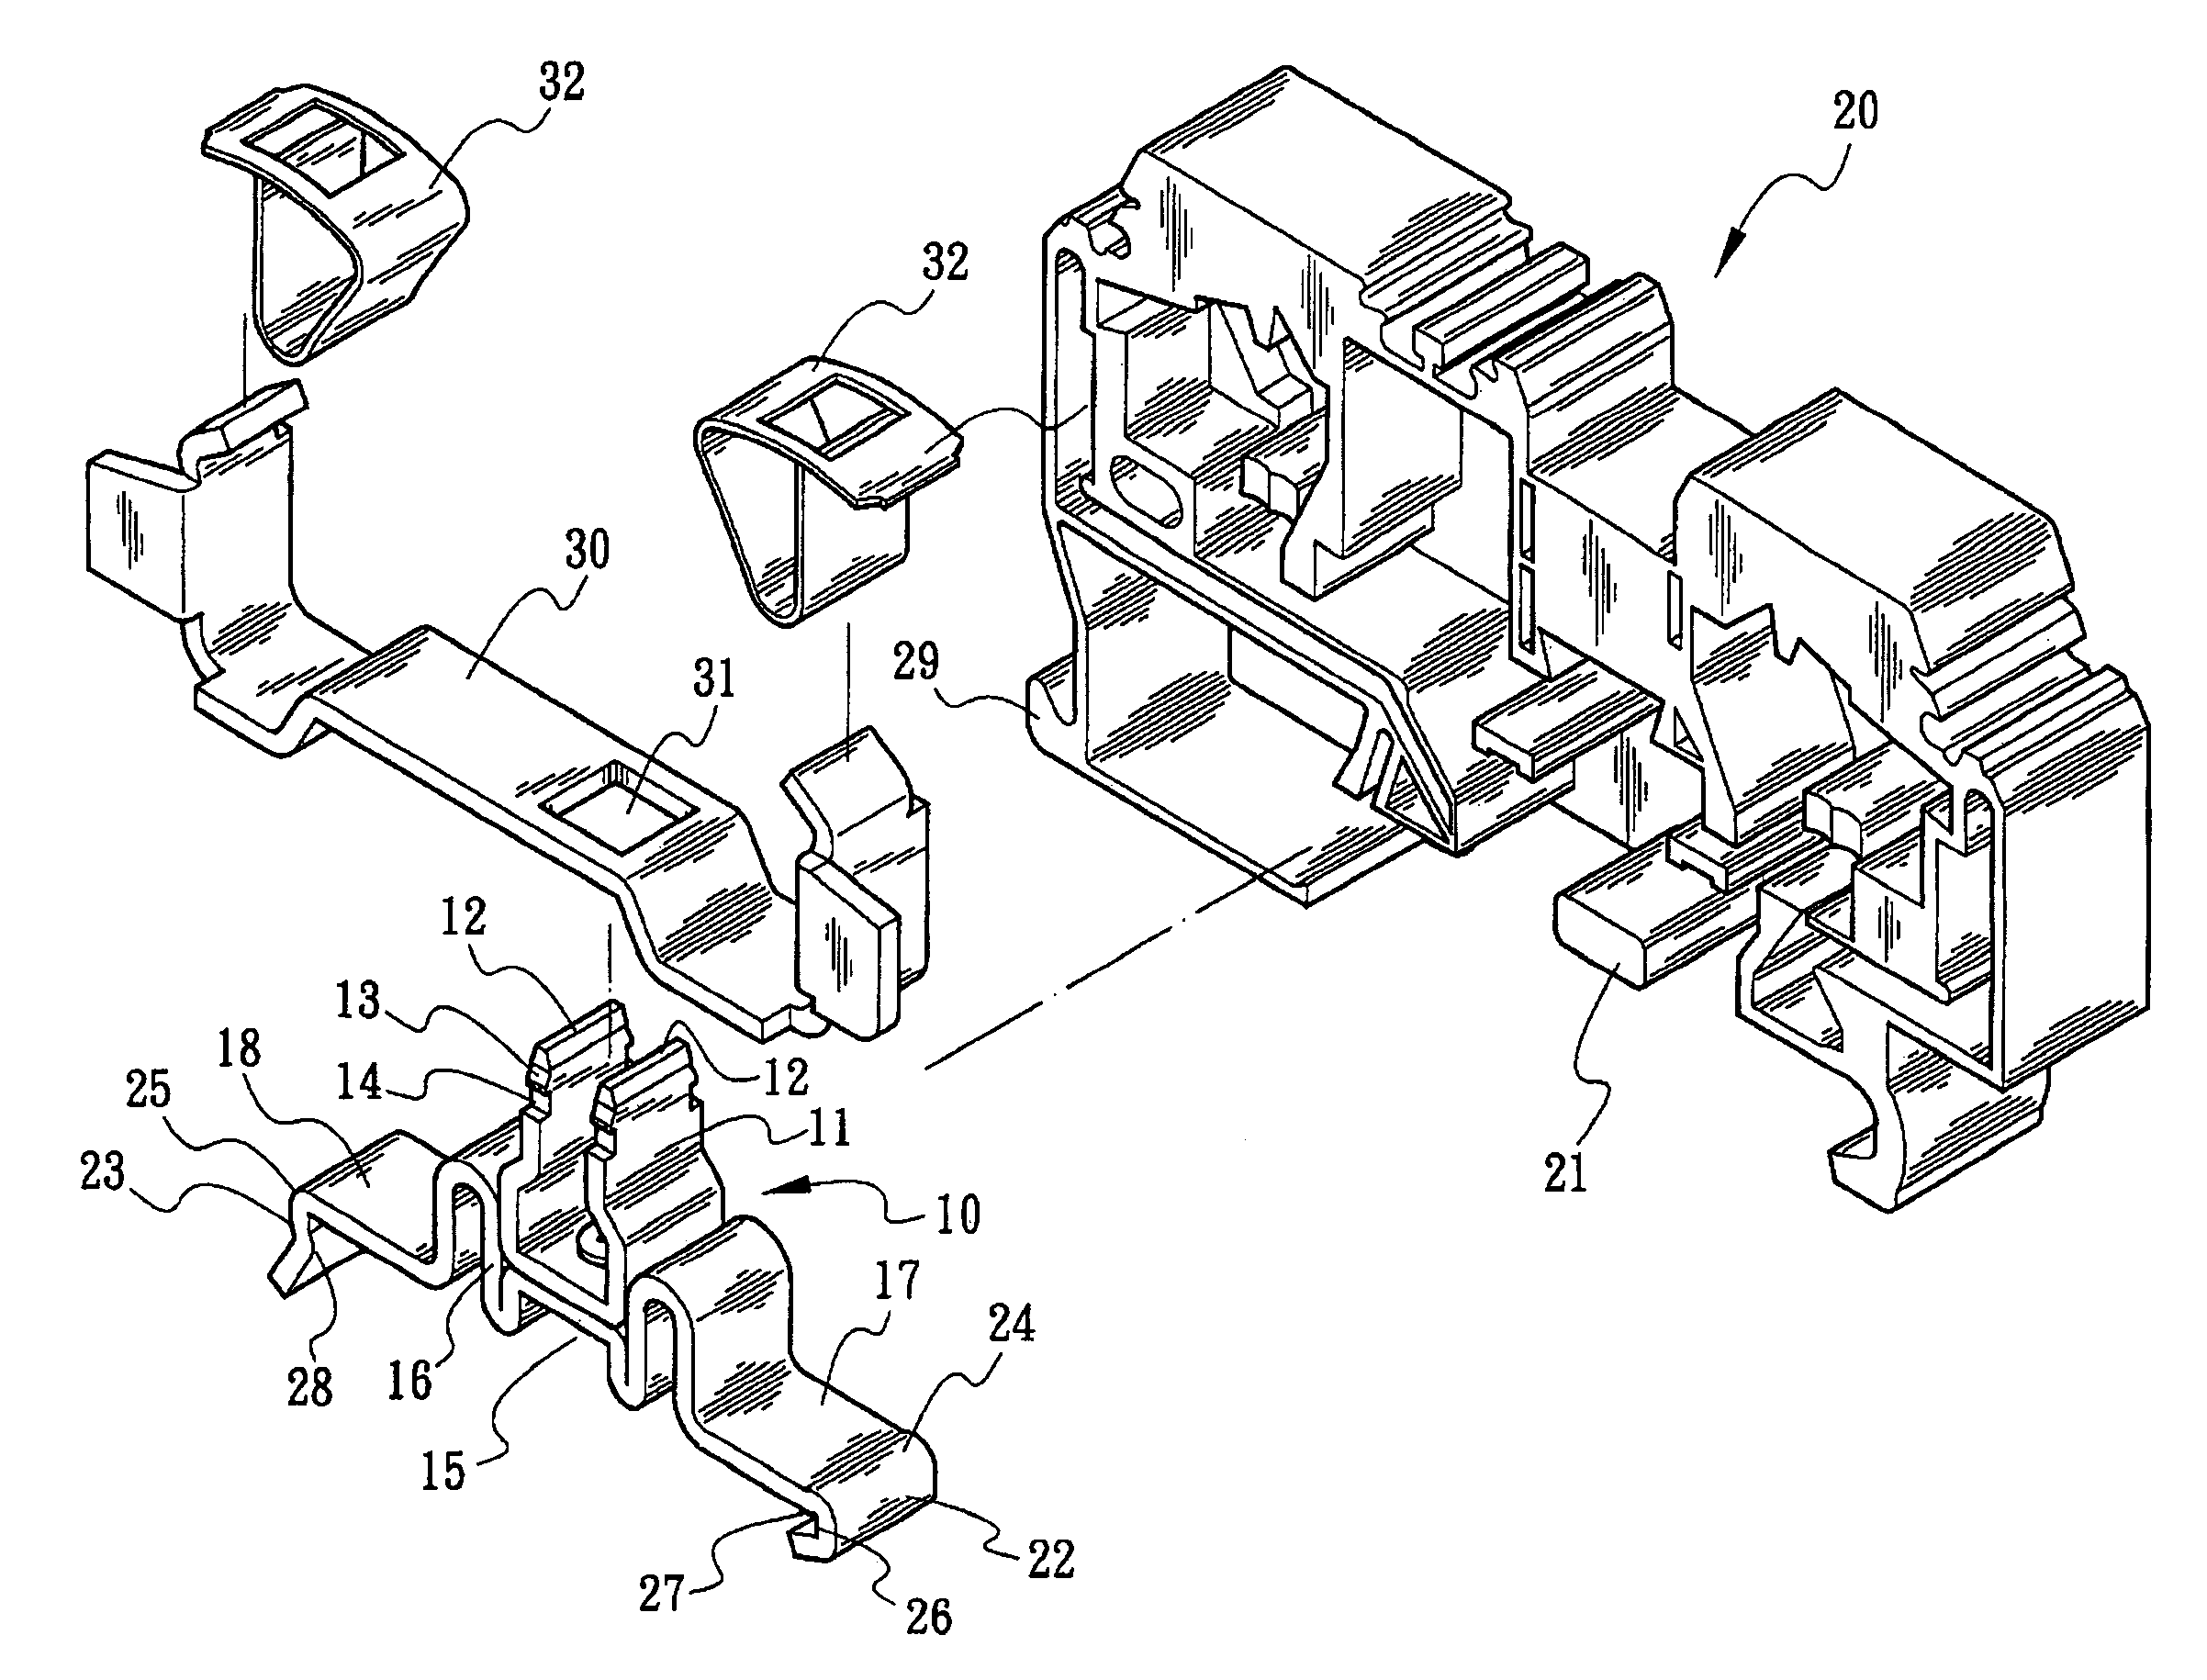 Rail-type grounding terminal having a two piece spring latch structure